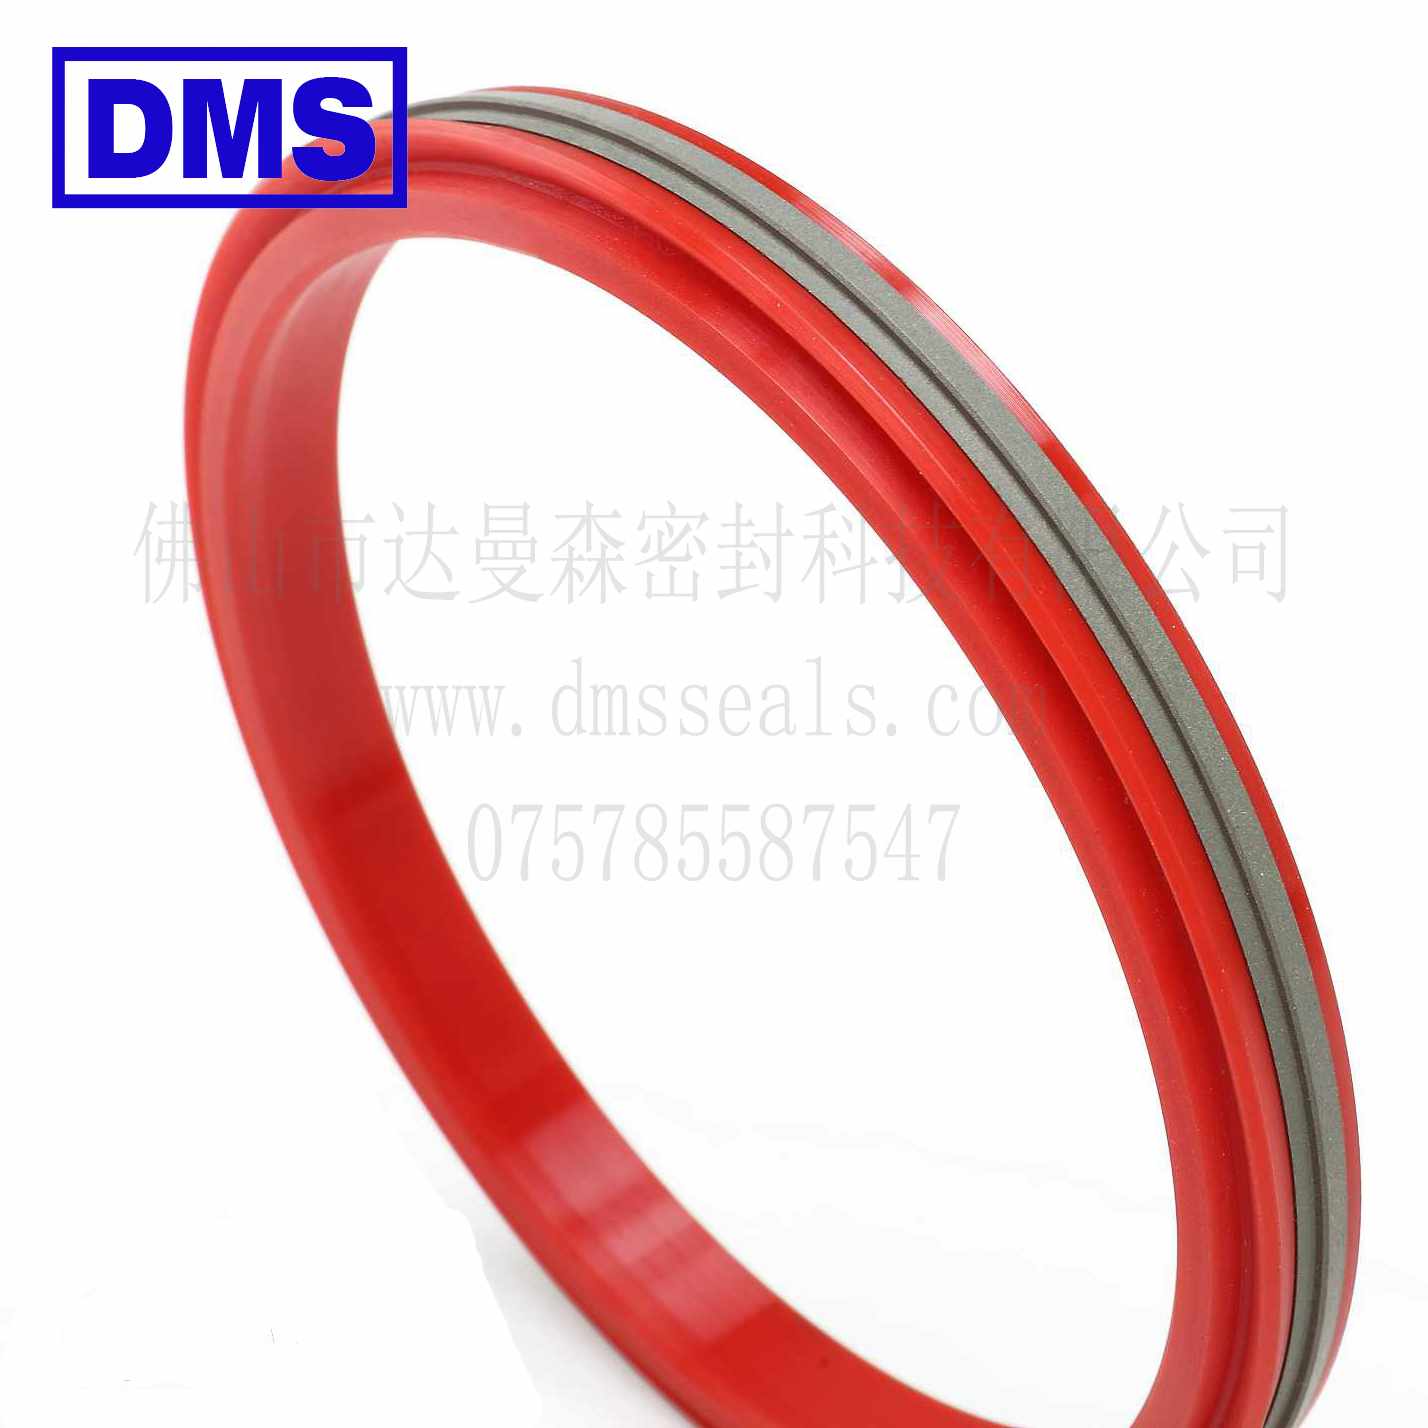 hydraulic cylinder piston seals with ptfe nbr and pom for pneumatic equipment DMS Seal Manufacturer-4